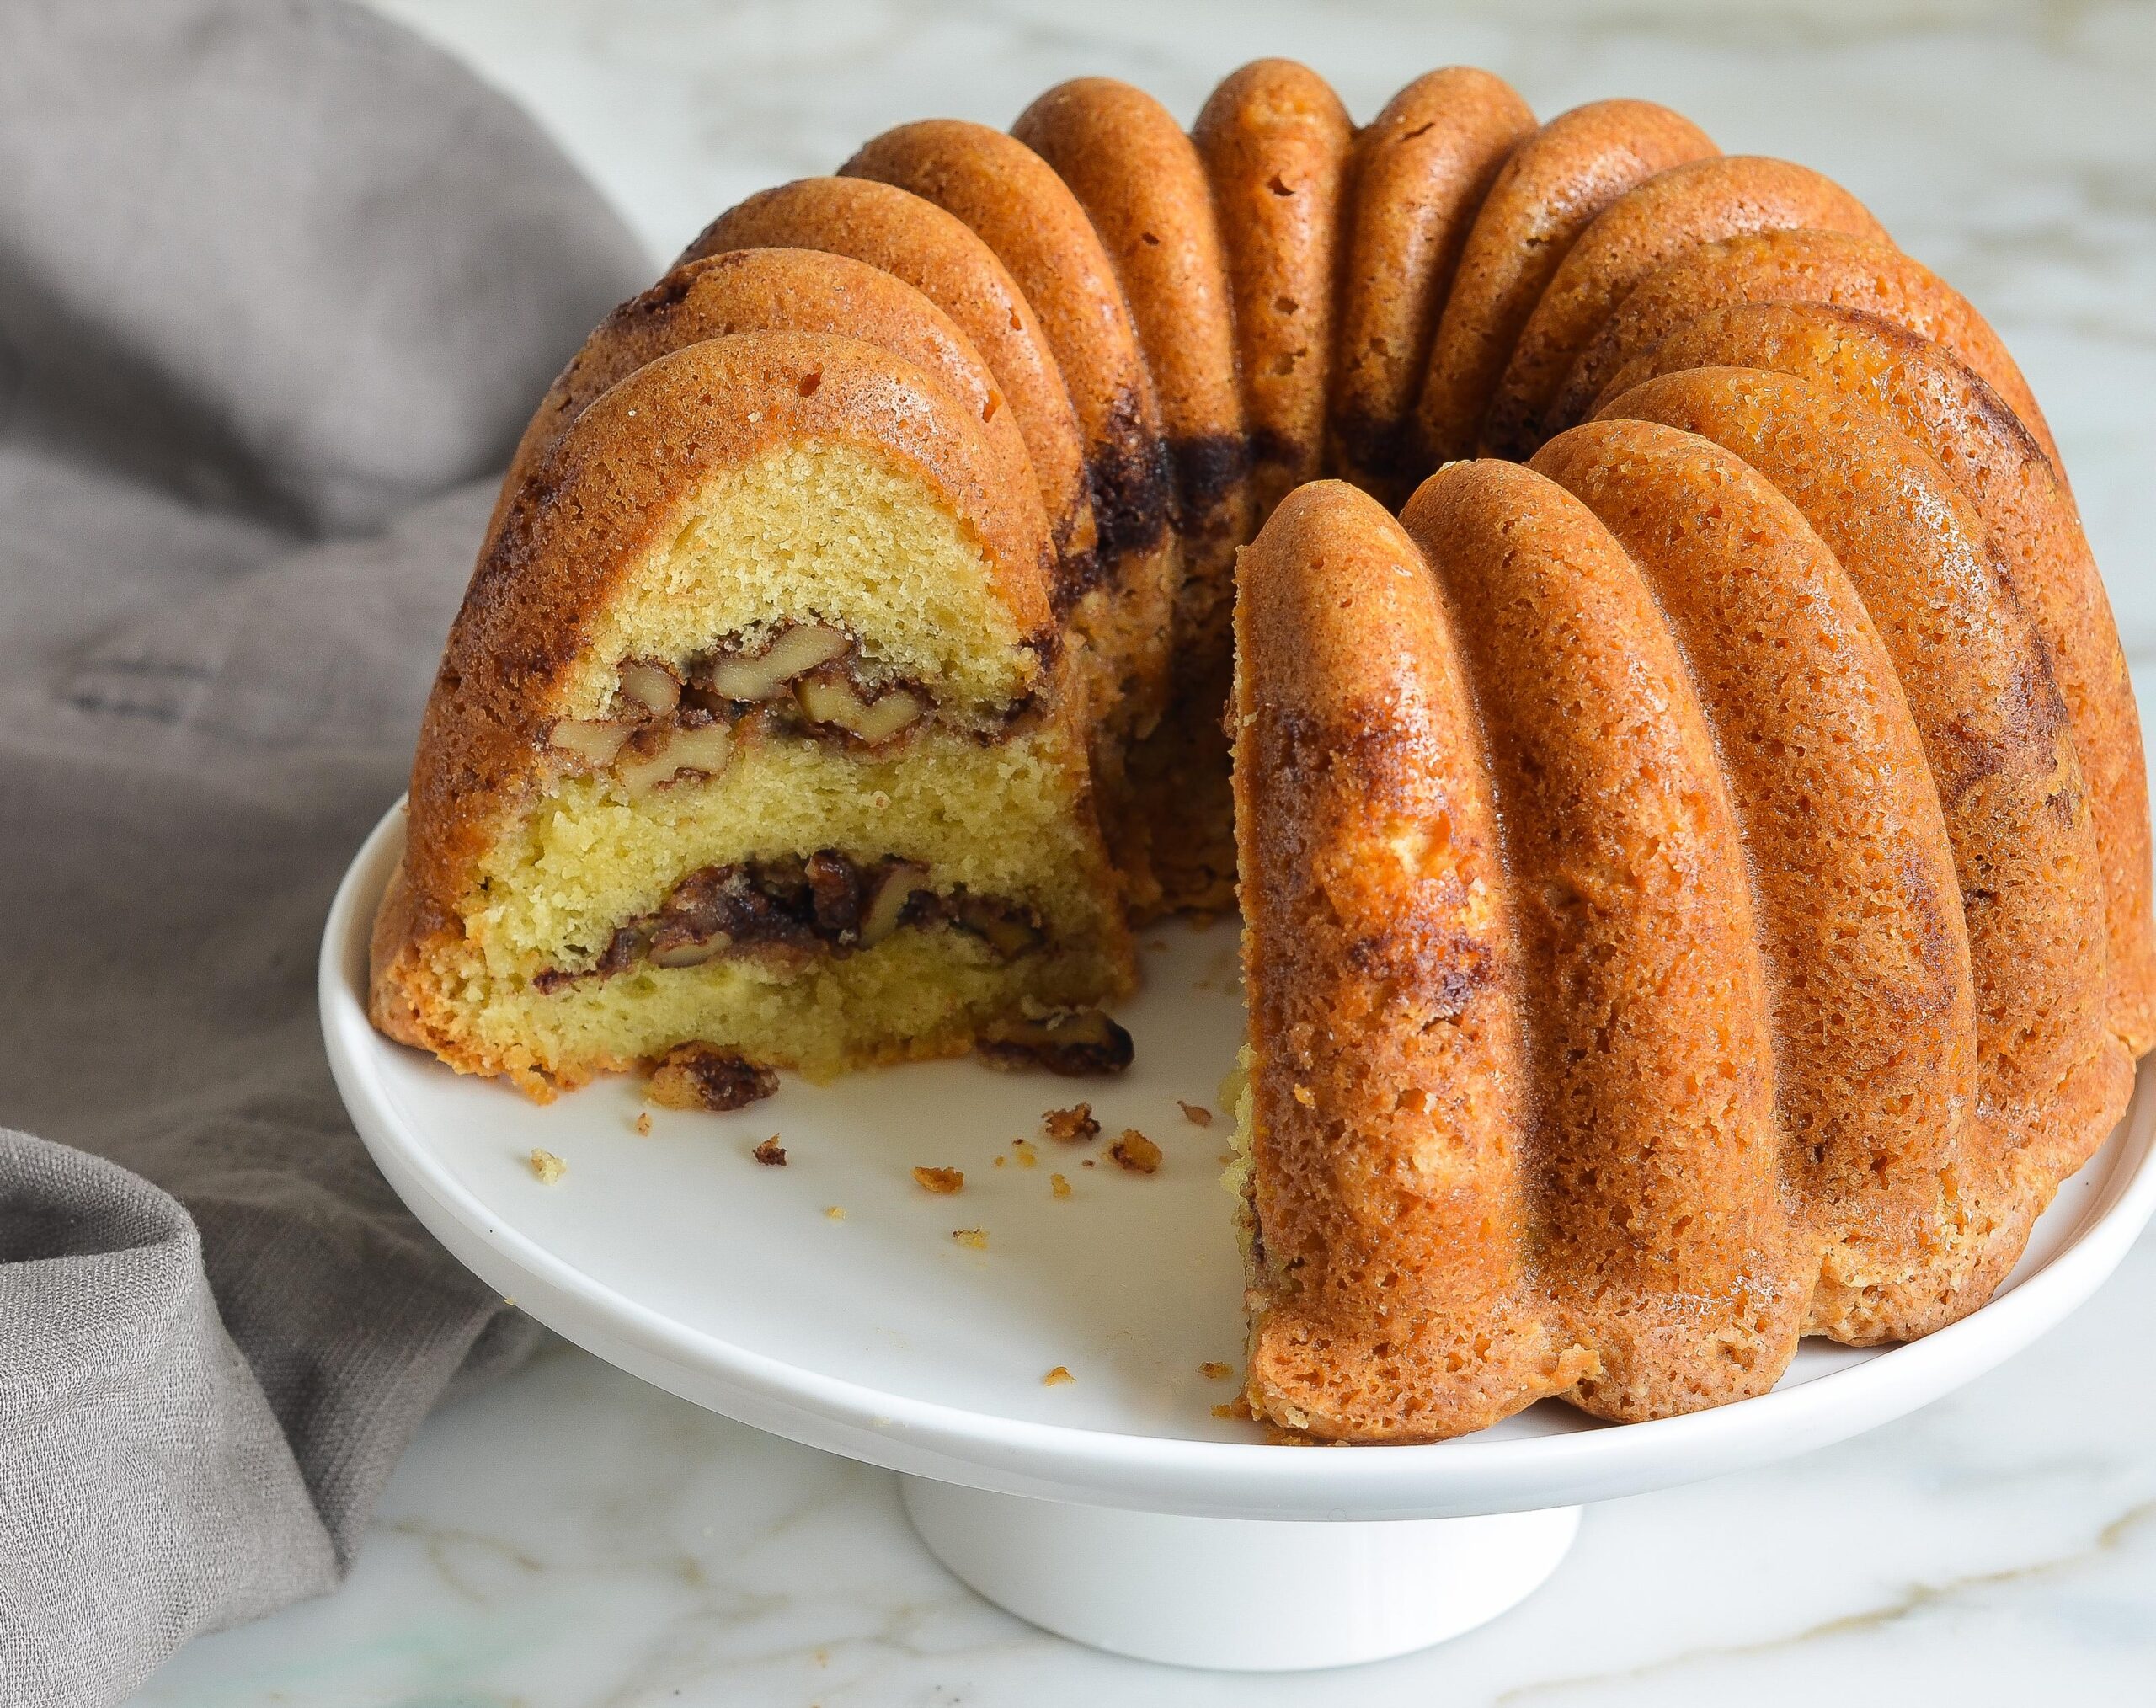  You'll fall in love with how easy and delicious this cake is.